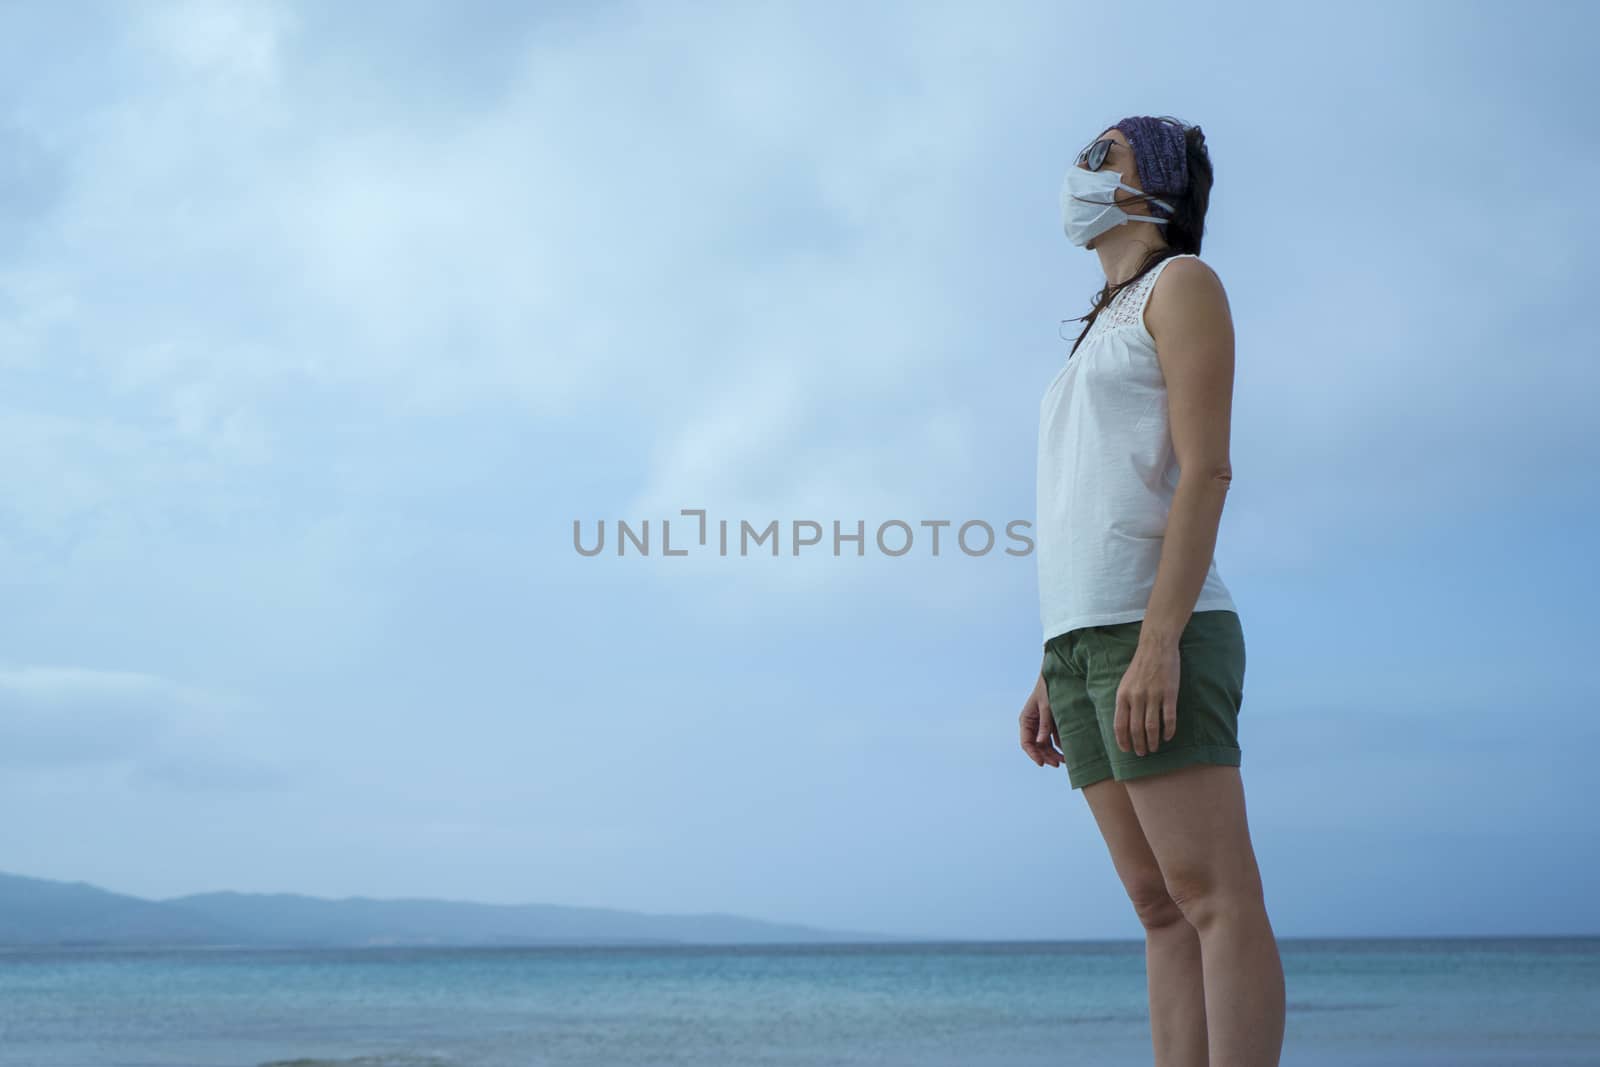 Coronavirus seaside holidays: shot of a woman at the beach looking at the sun with the mask for Covid-19 pandemic with cloudy sky